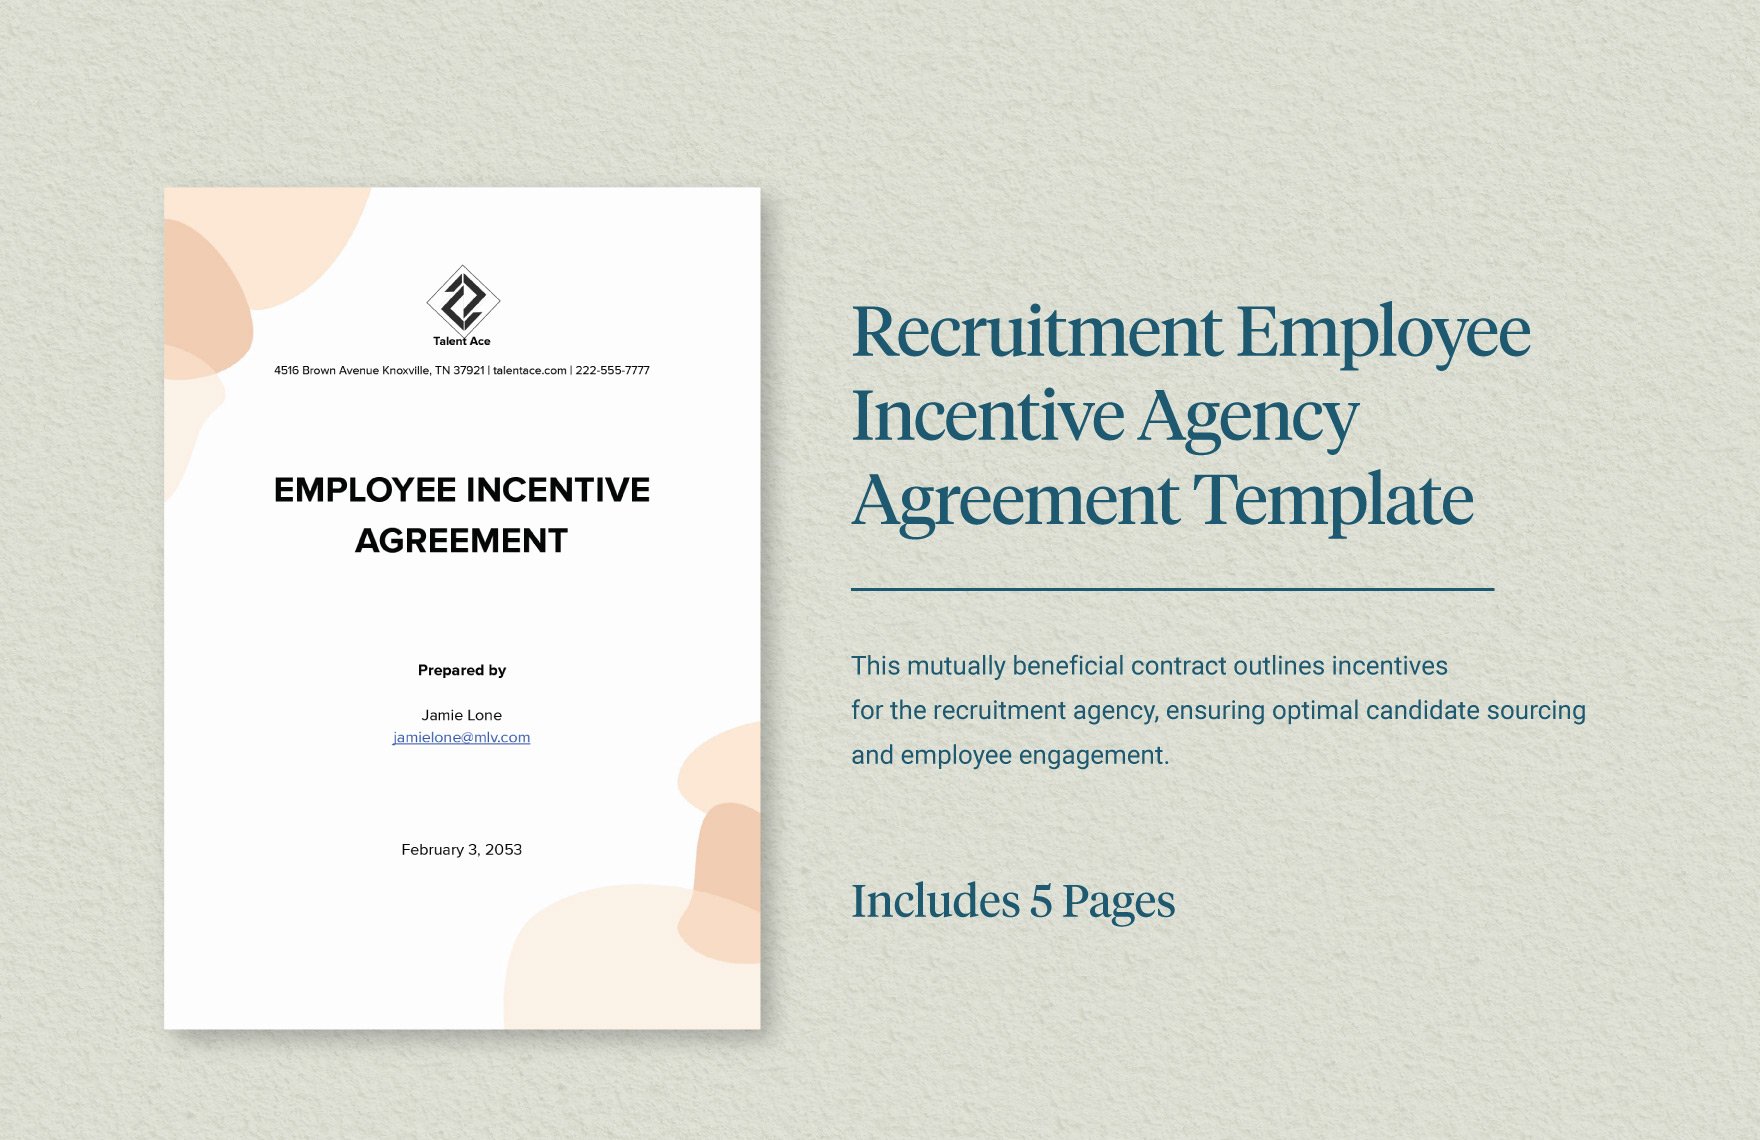 Recruitment Employee Incentive Agency Agreement Template